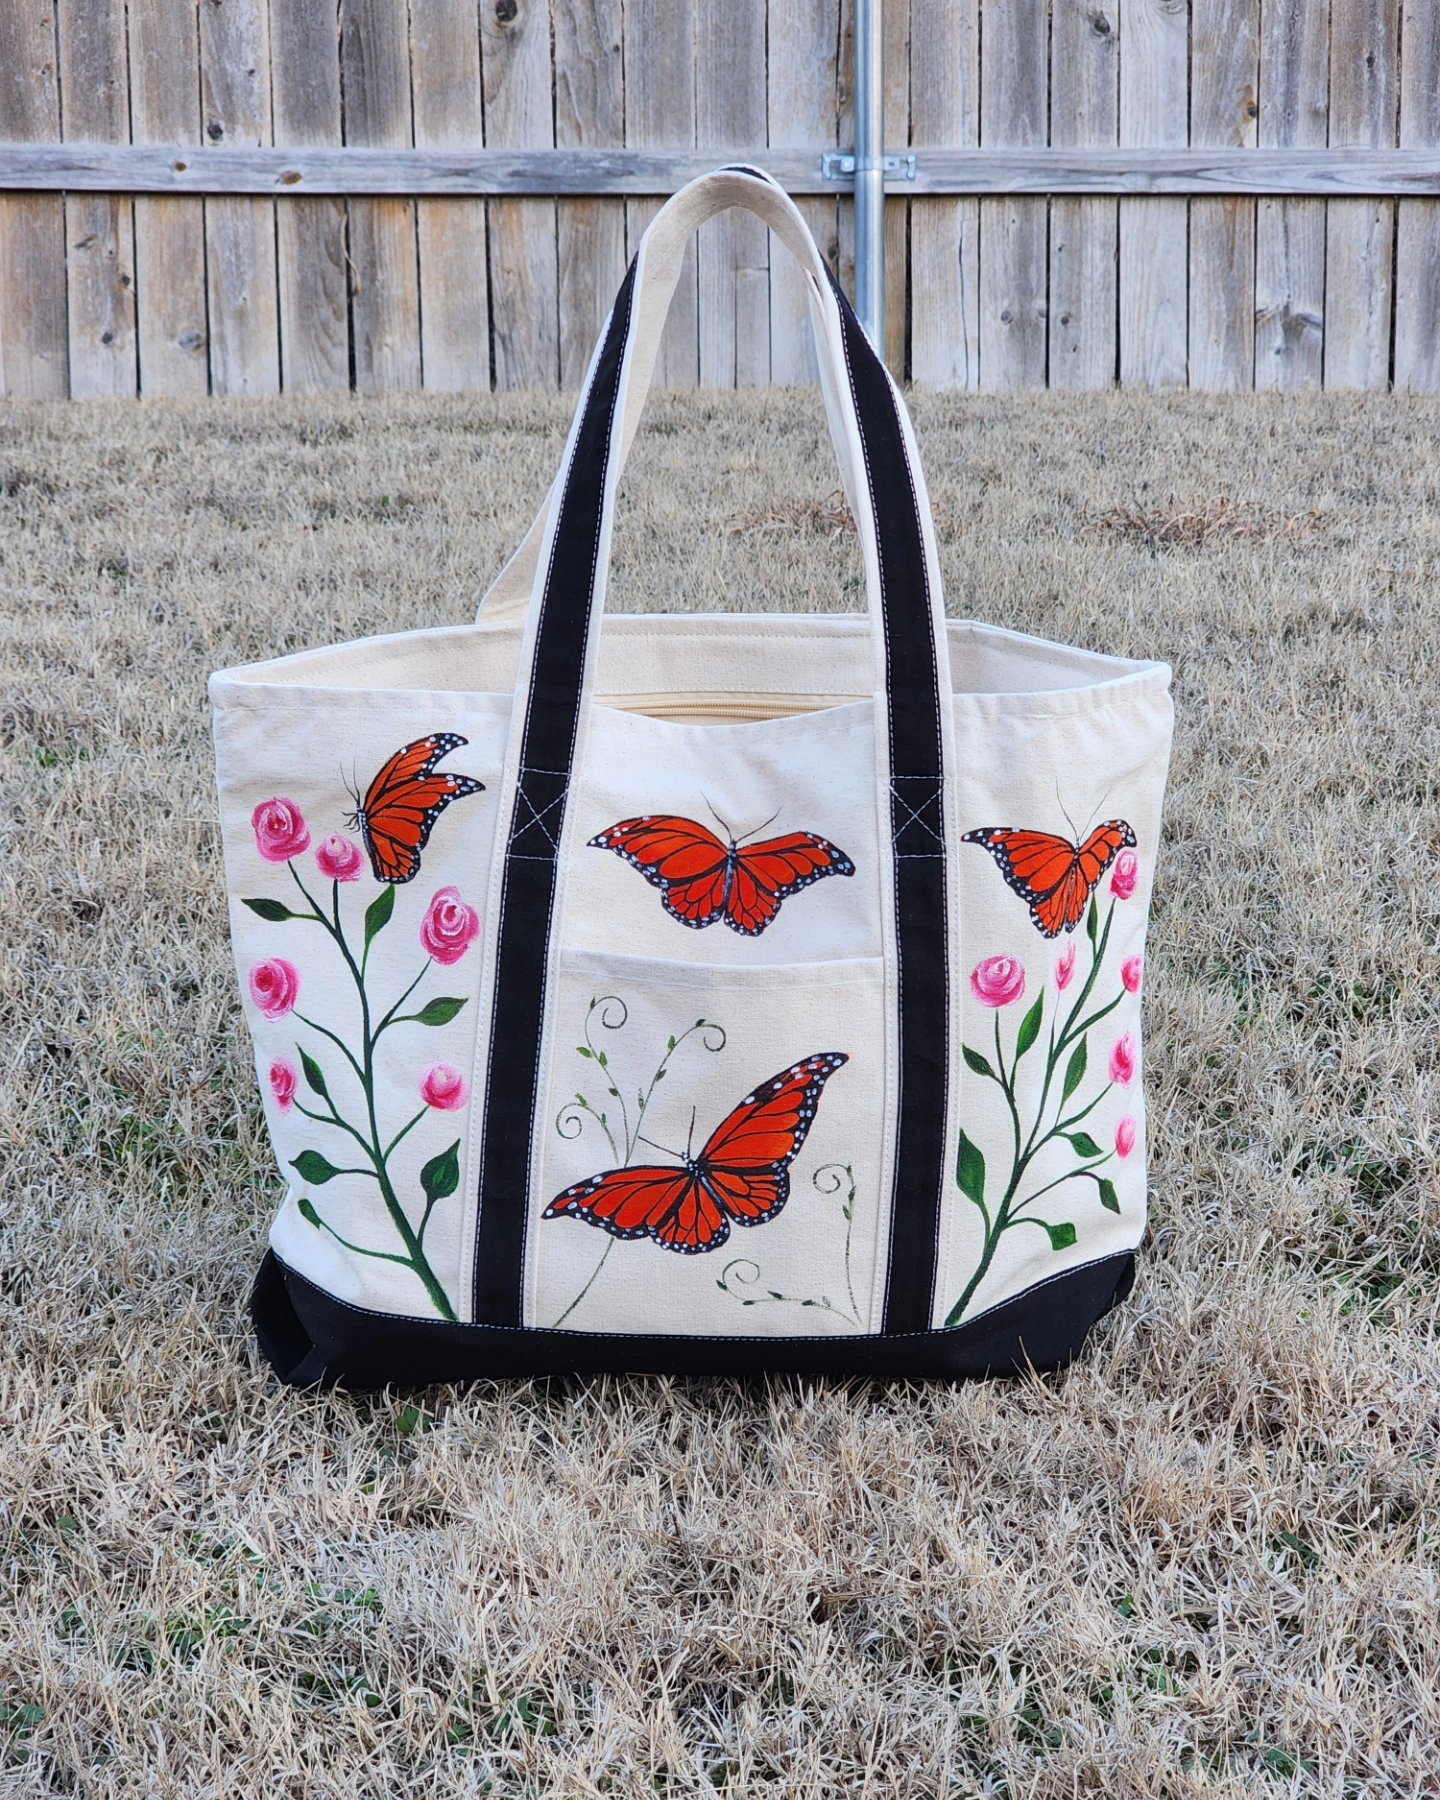 Large Tote bag with lots of space and extra pockets inside and outside. Perfect to carry many things anywhere.